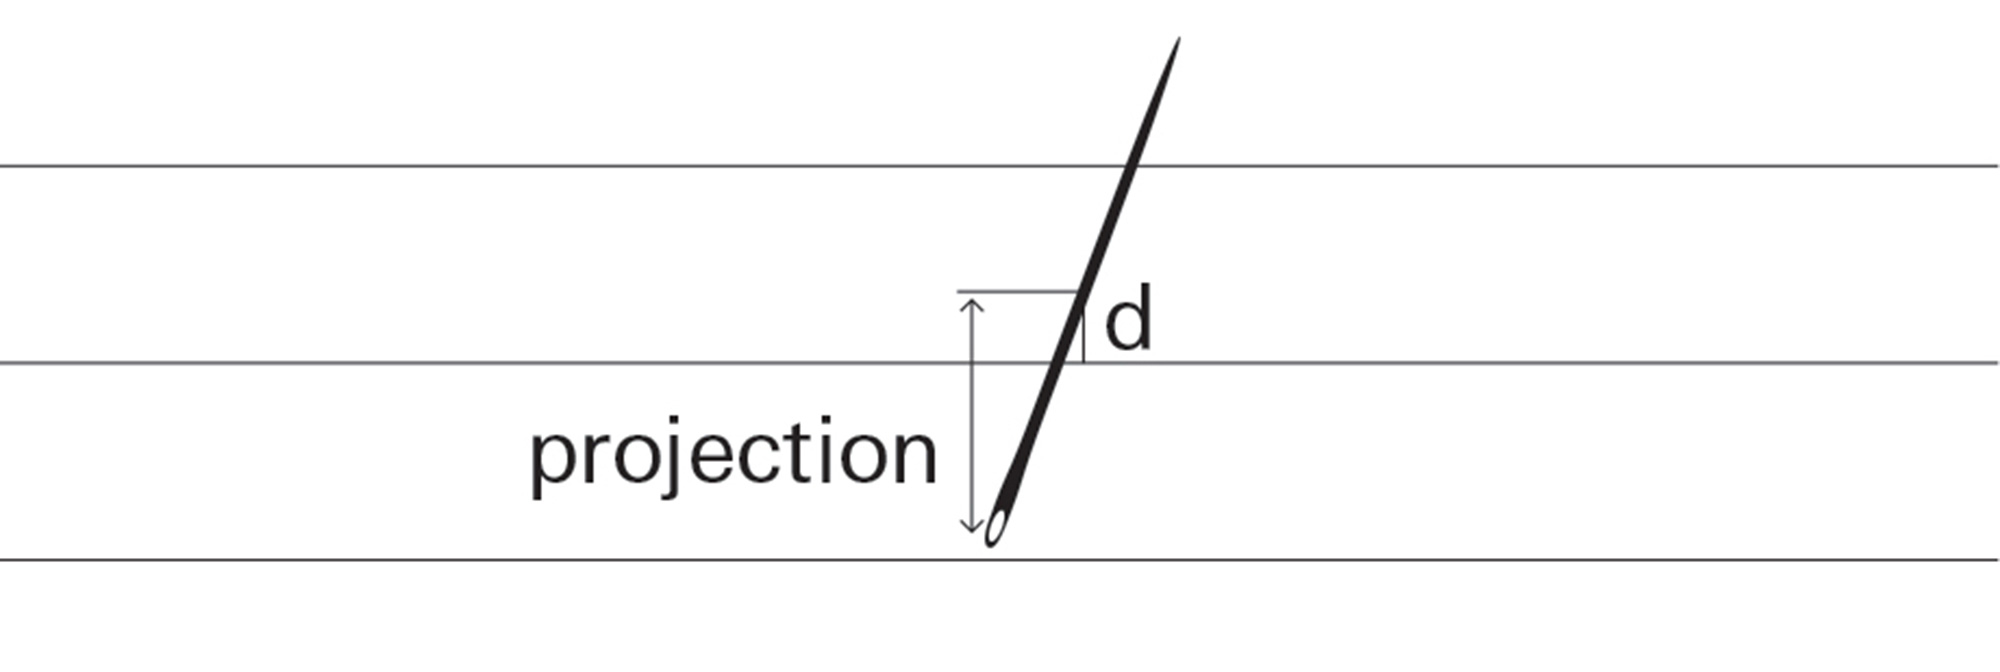 A digital illustration showing the conditions under which a needle will intersect exactly one line.